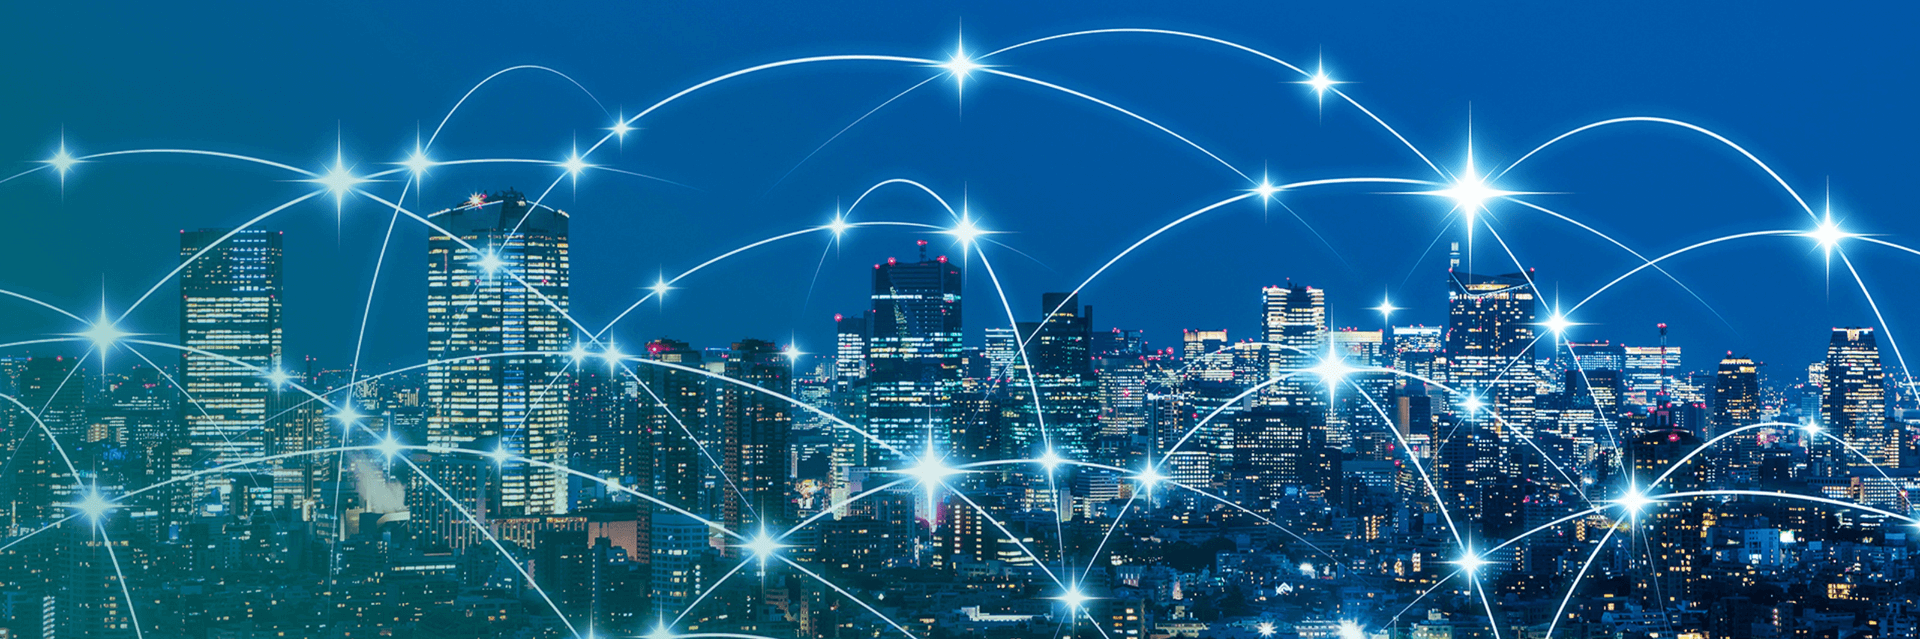 A photo of a city skyline at night overlaid with a graphic to imply wireless communication